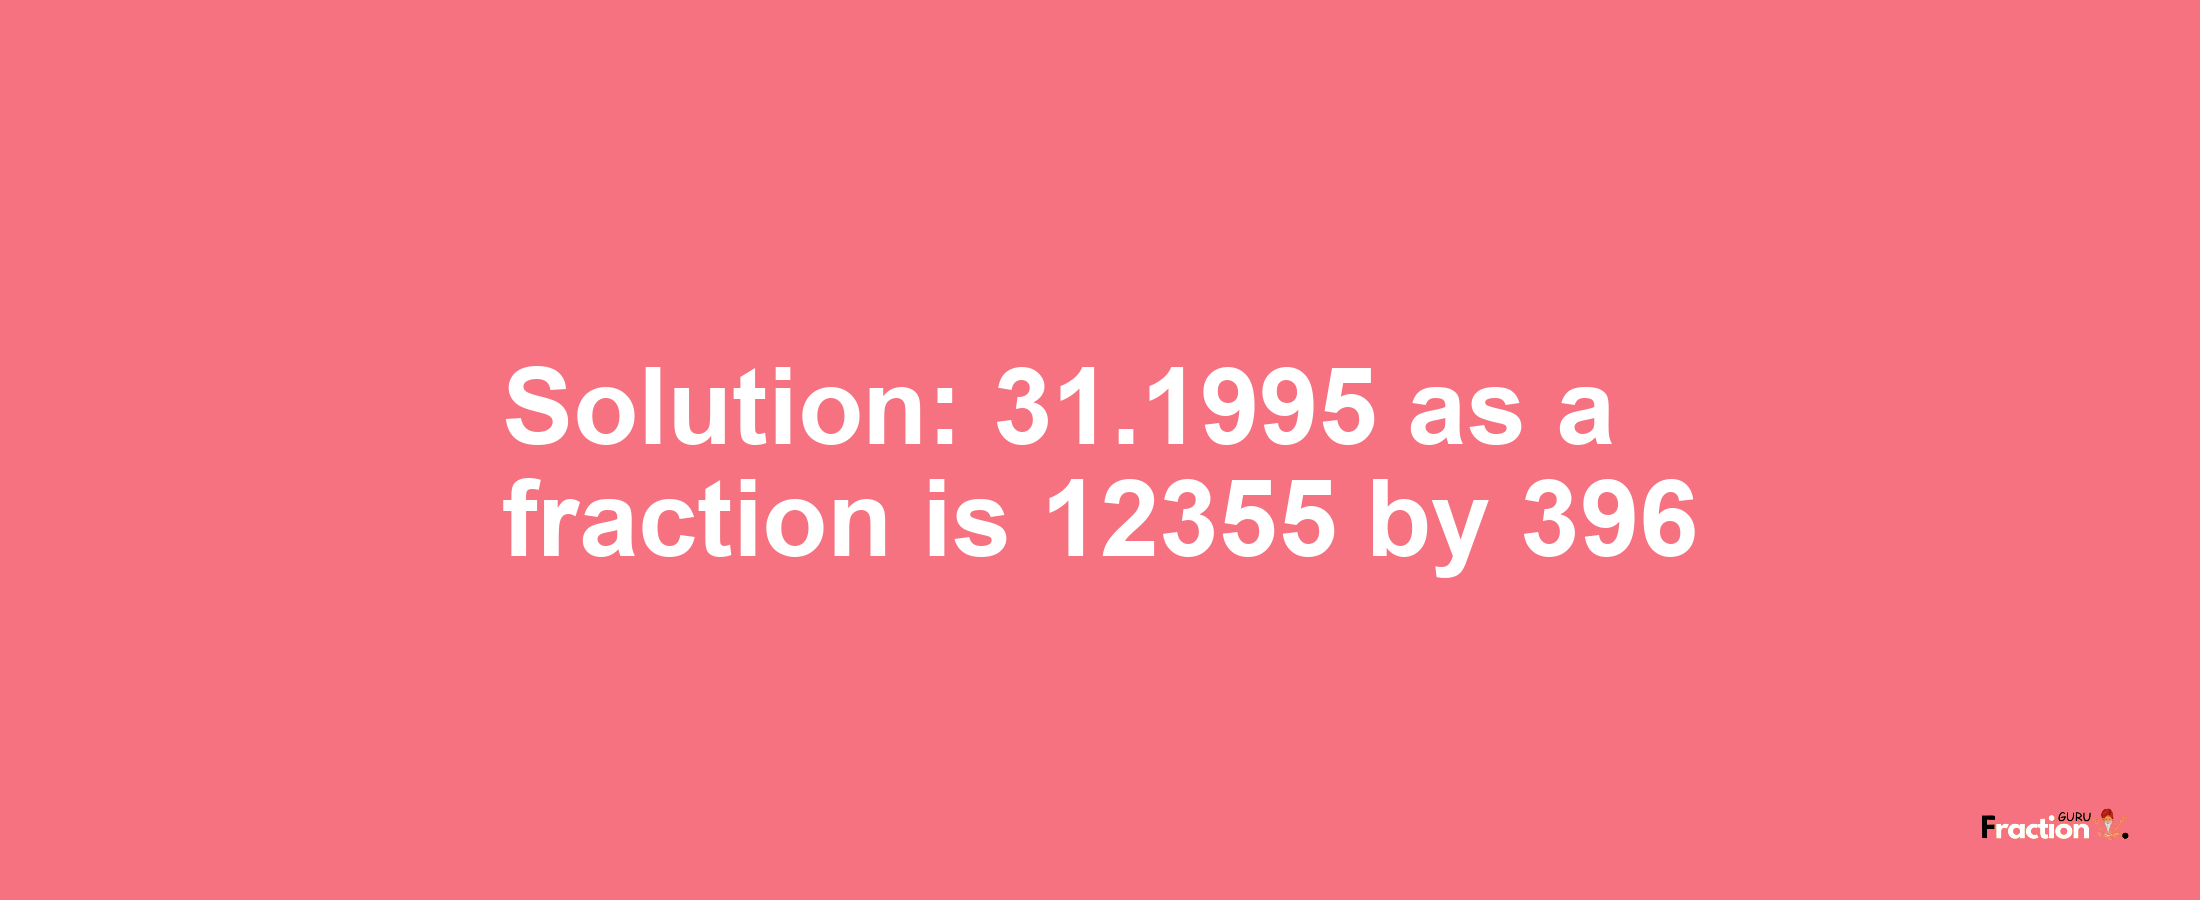 Solution:31.1995 as a fraction is 12355/396